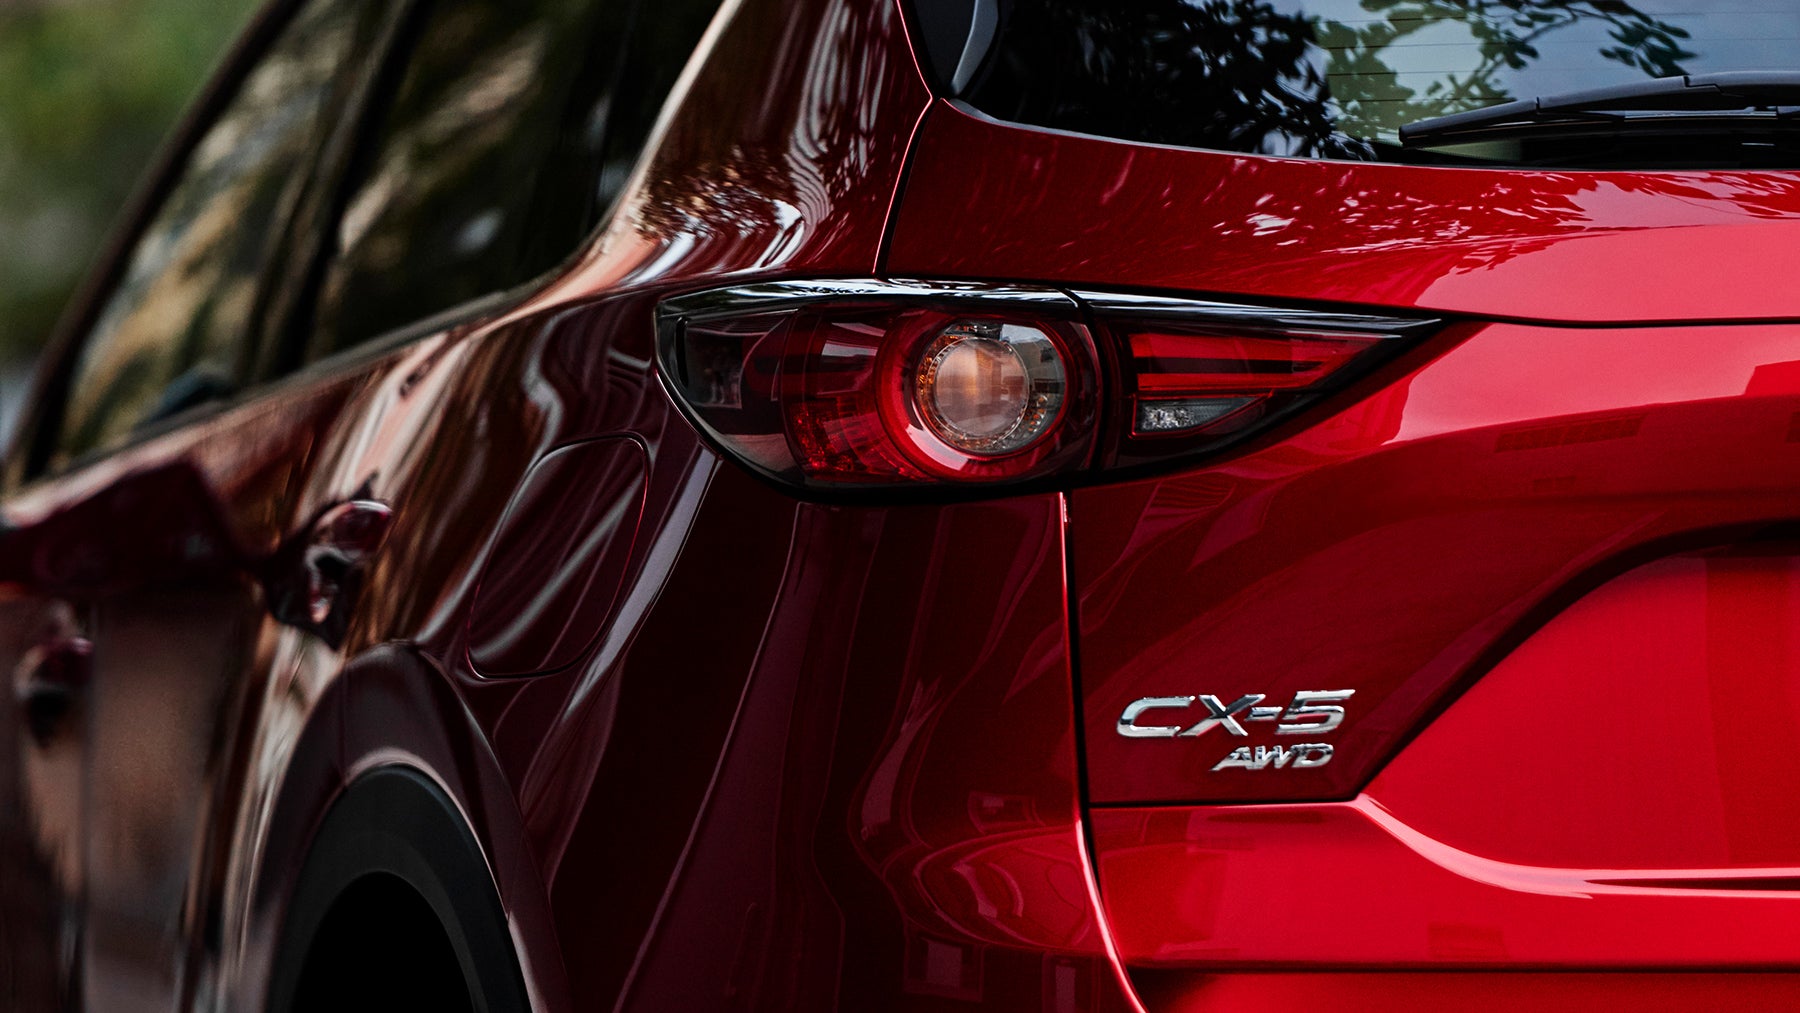 2019 Mazda CX-5 at Russell & Smith Mazda in Houston TX